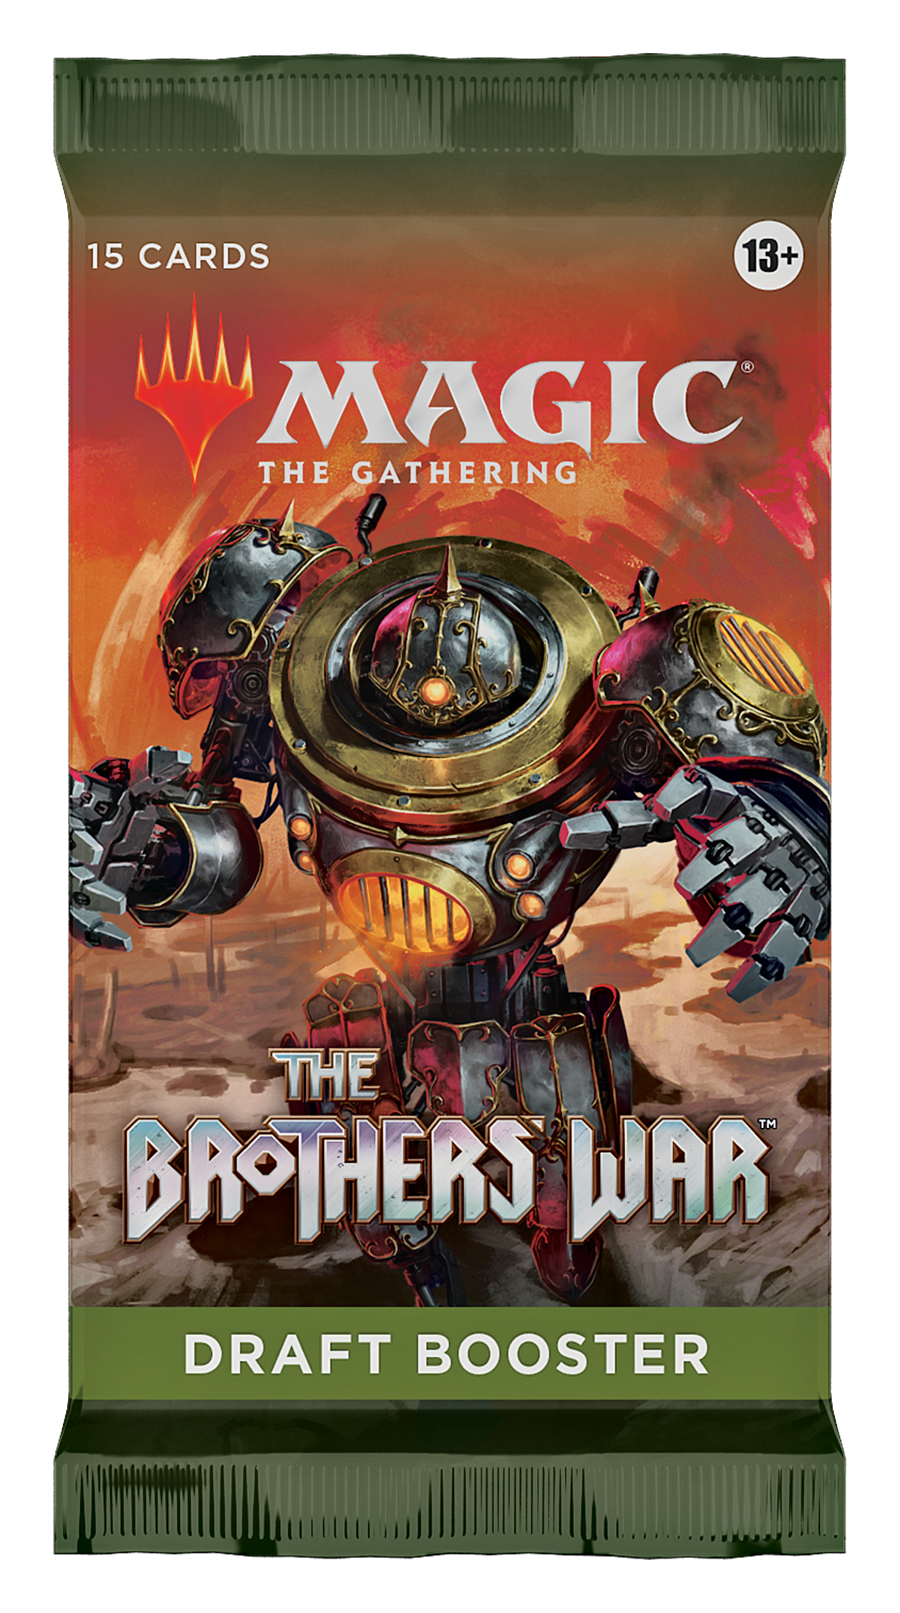 The Brothers' War - Draft Booster Display | Devastation Store